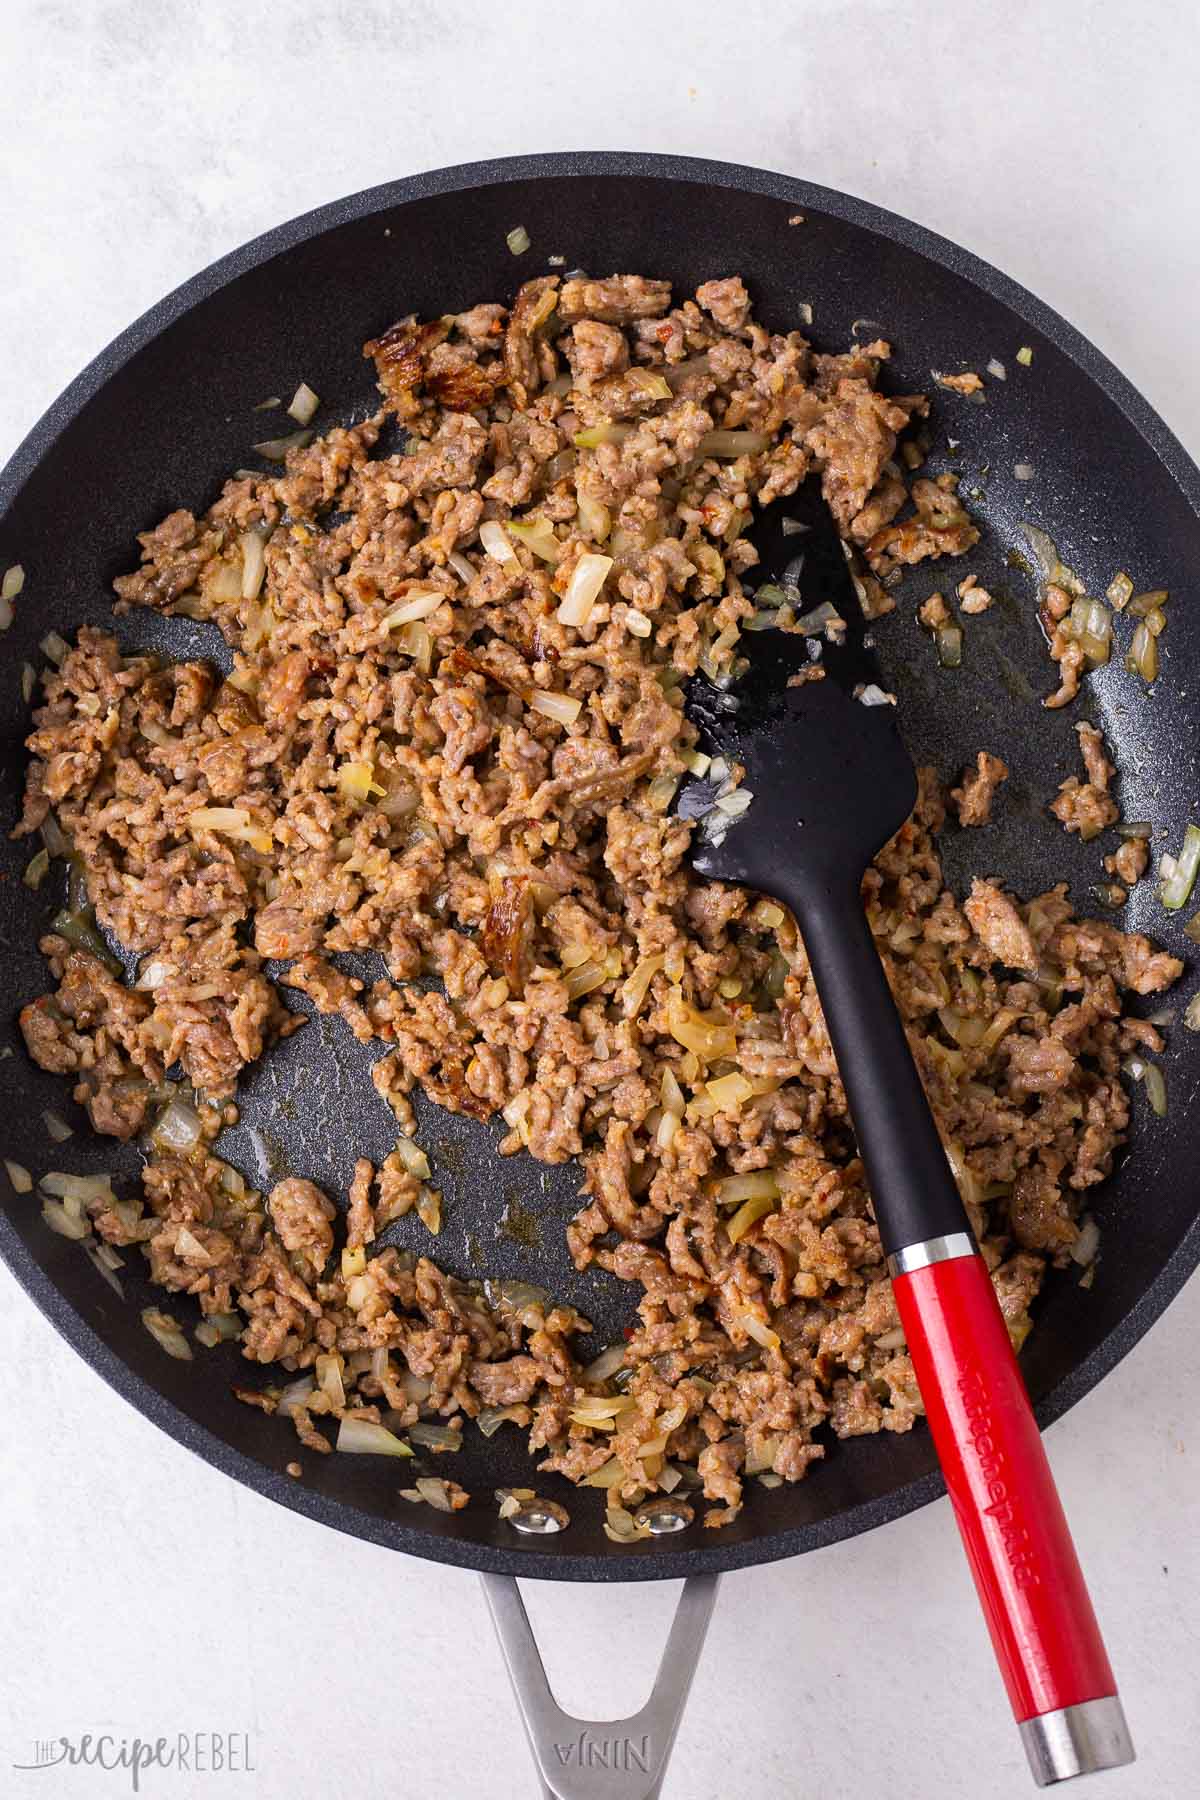 crumbled sausage cooked in black skillet.